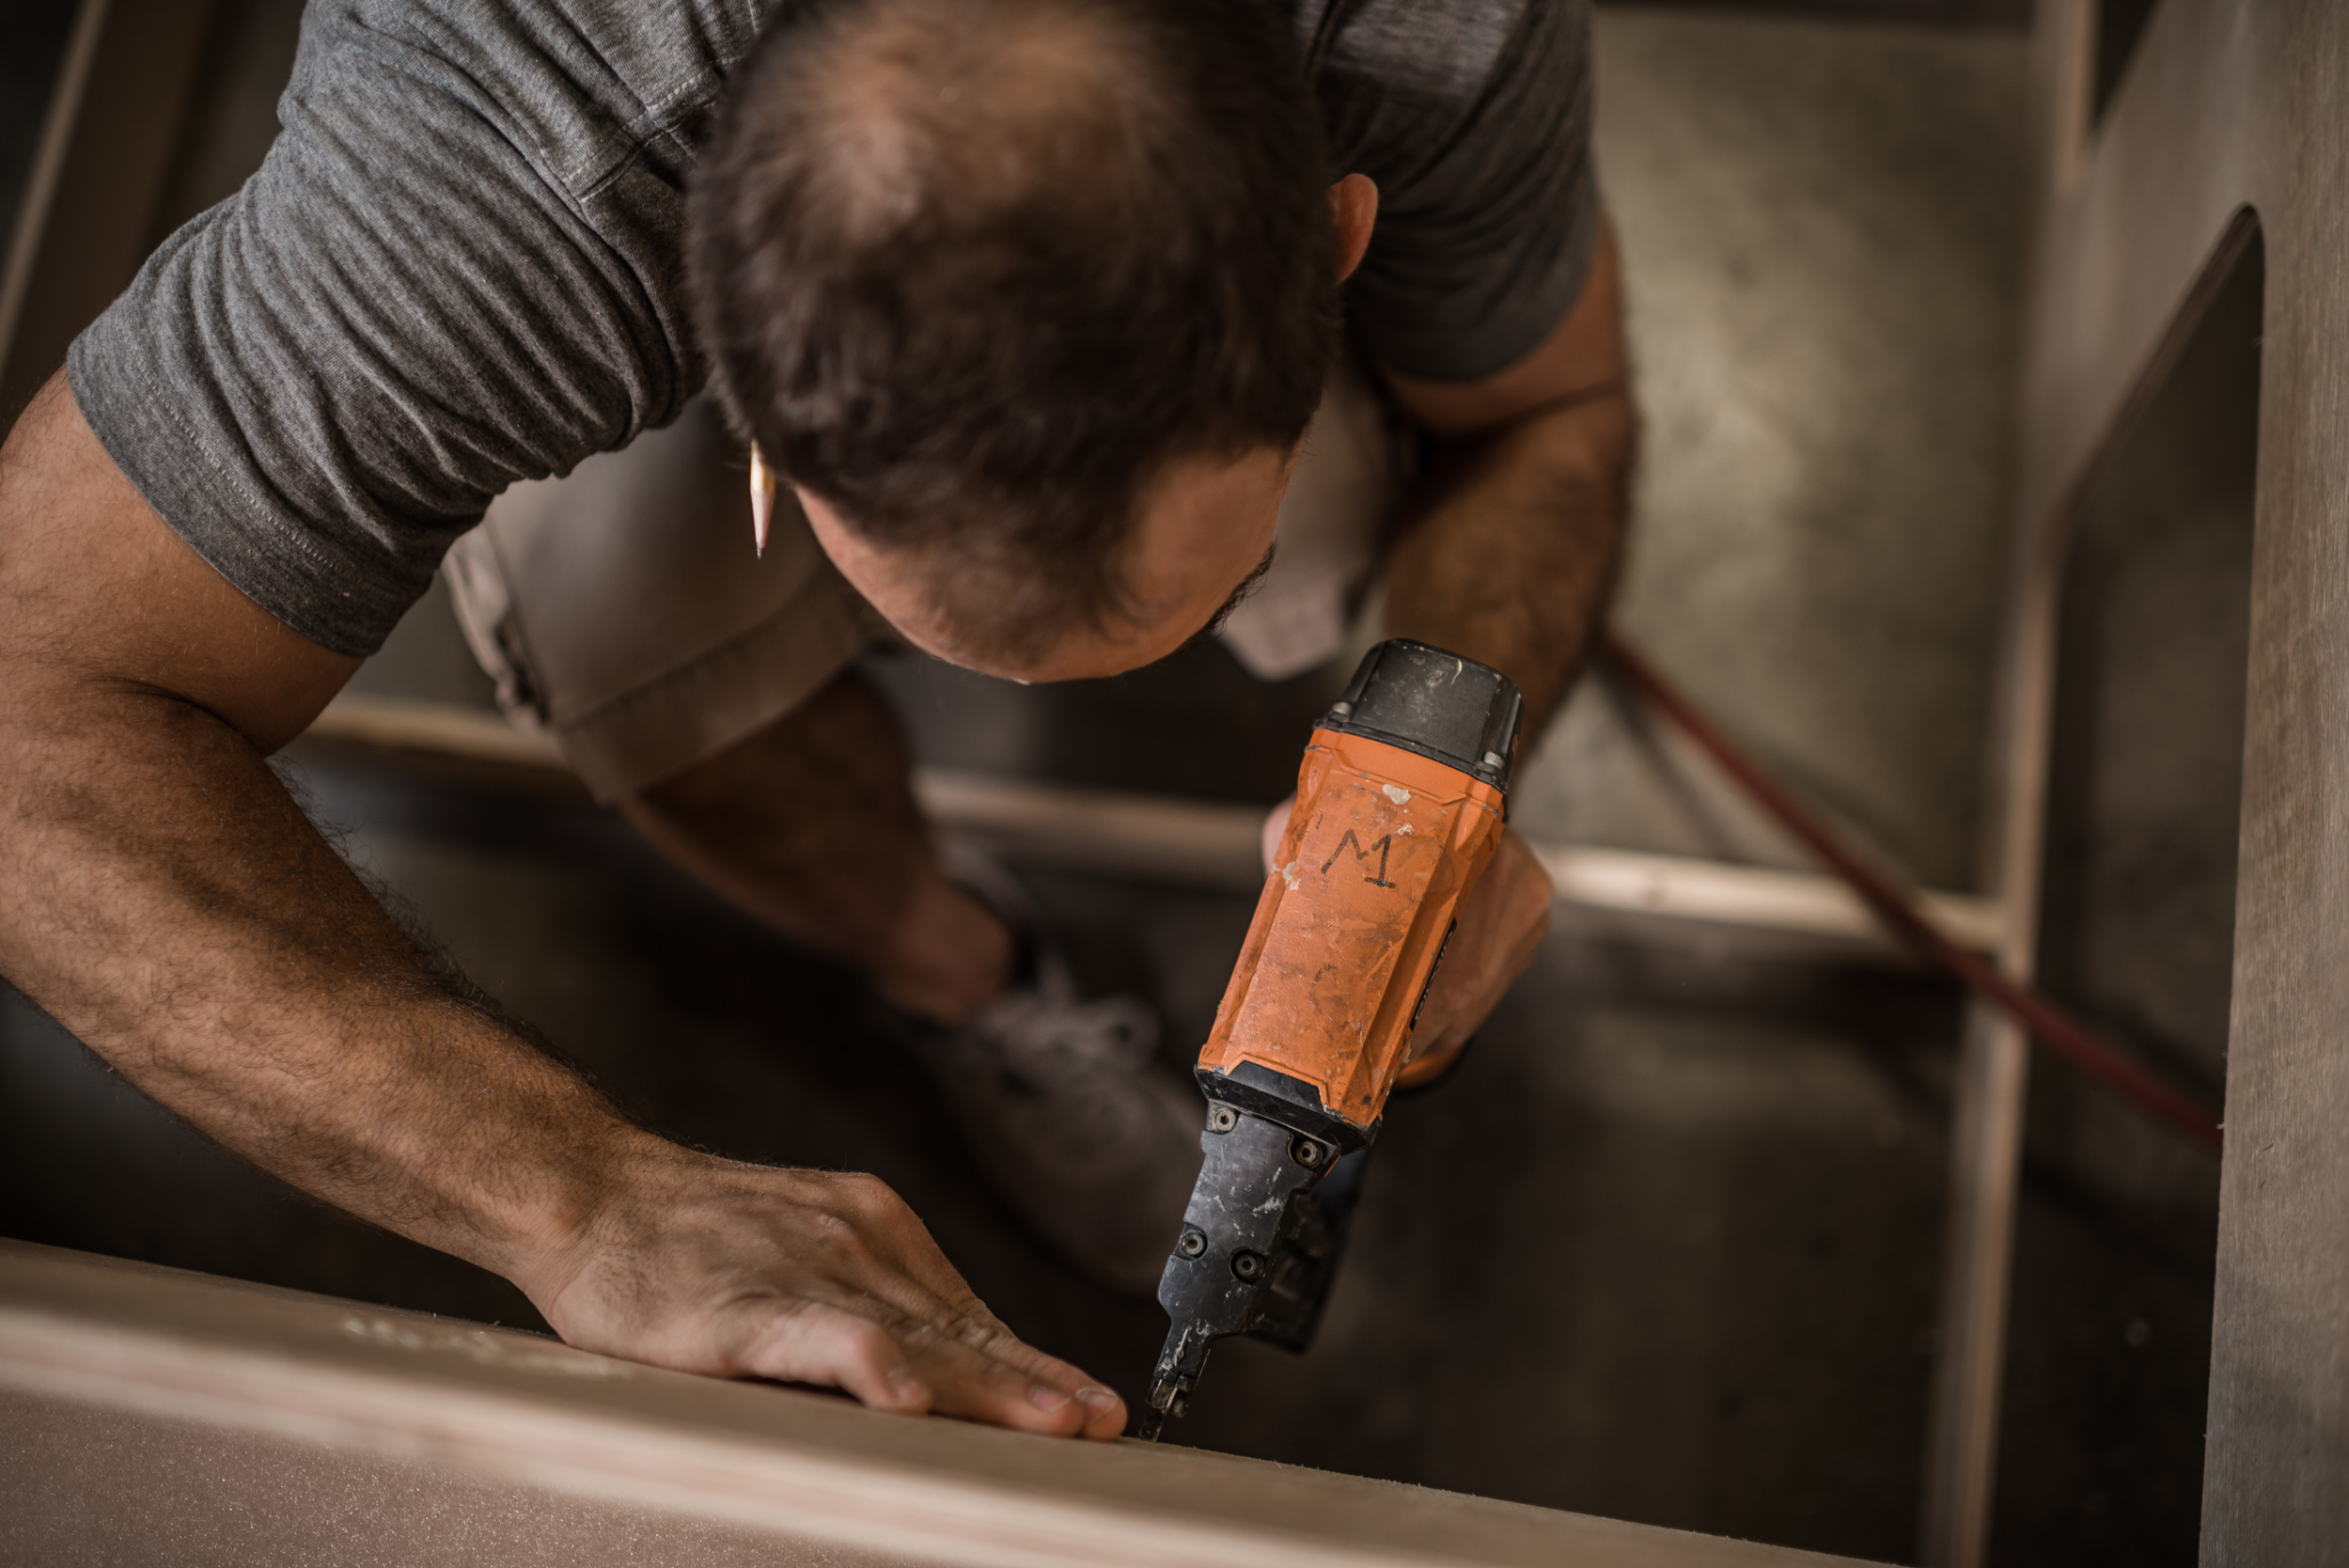 Man at work with staple gun tool at the Nashville industrial construction custom builder MadeFIrst, by commercial photographer Kristina Krug